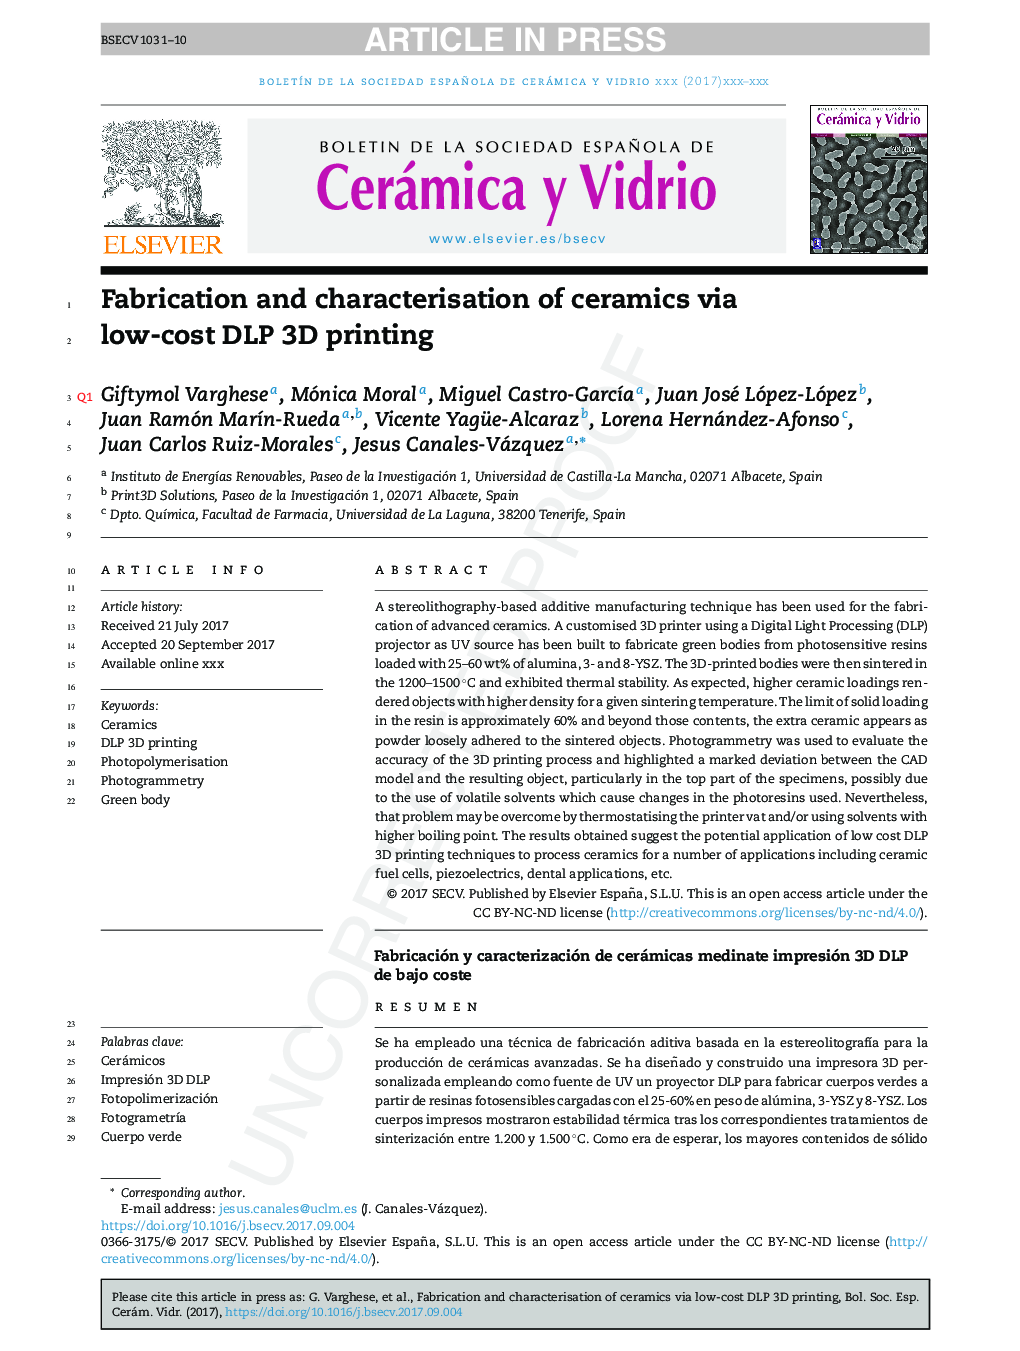 Fabrication and characterisation of ceramics via low-cost DLP 3D printing